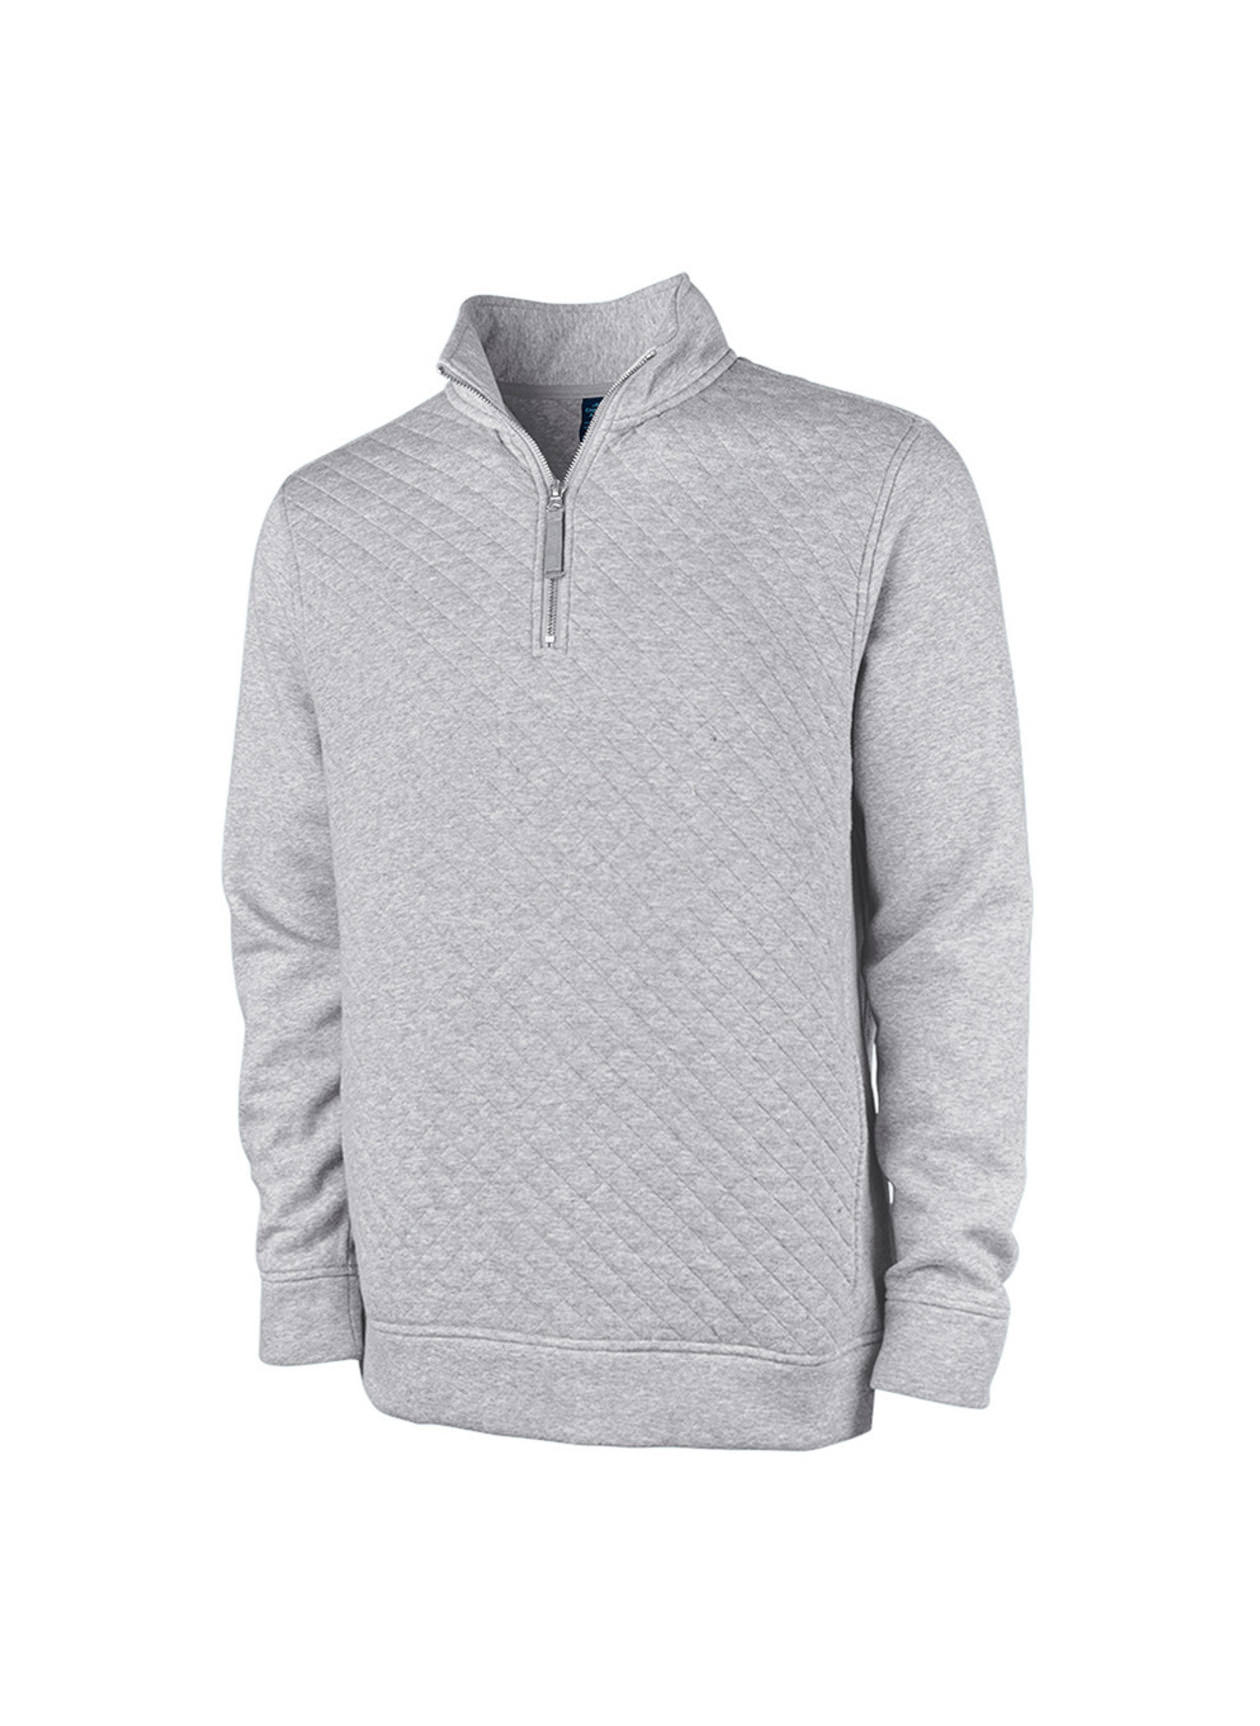 Charles River Men's Heather Grey Franconia Pullover